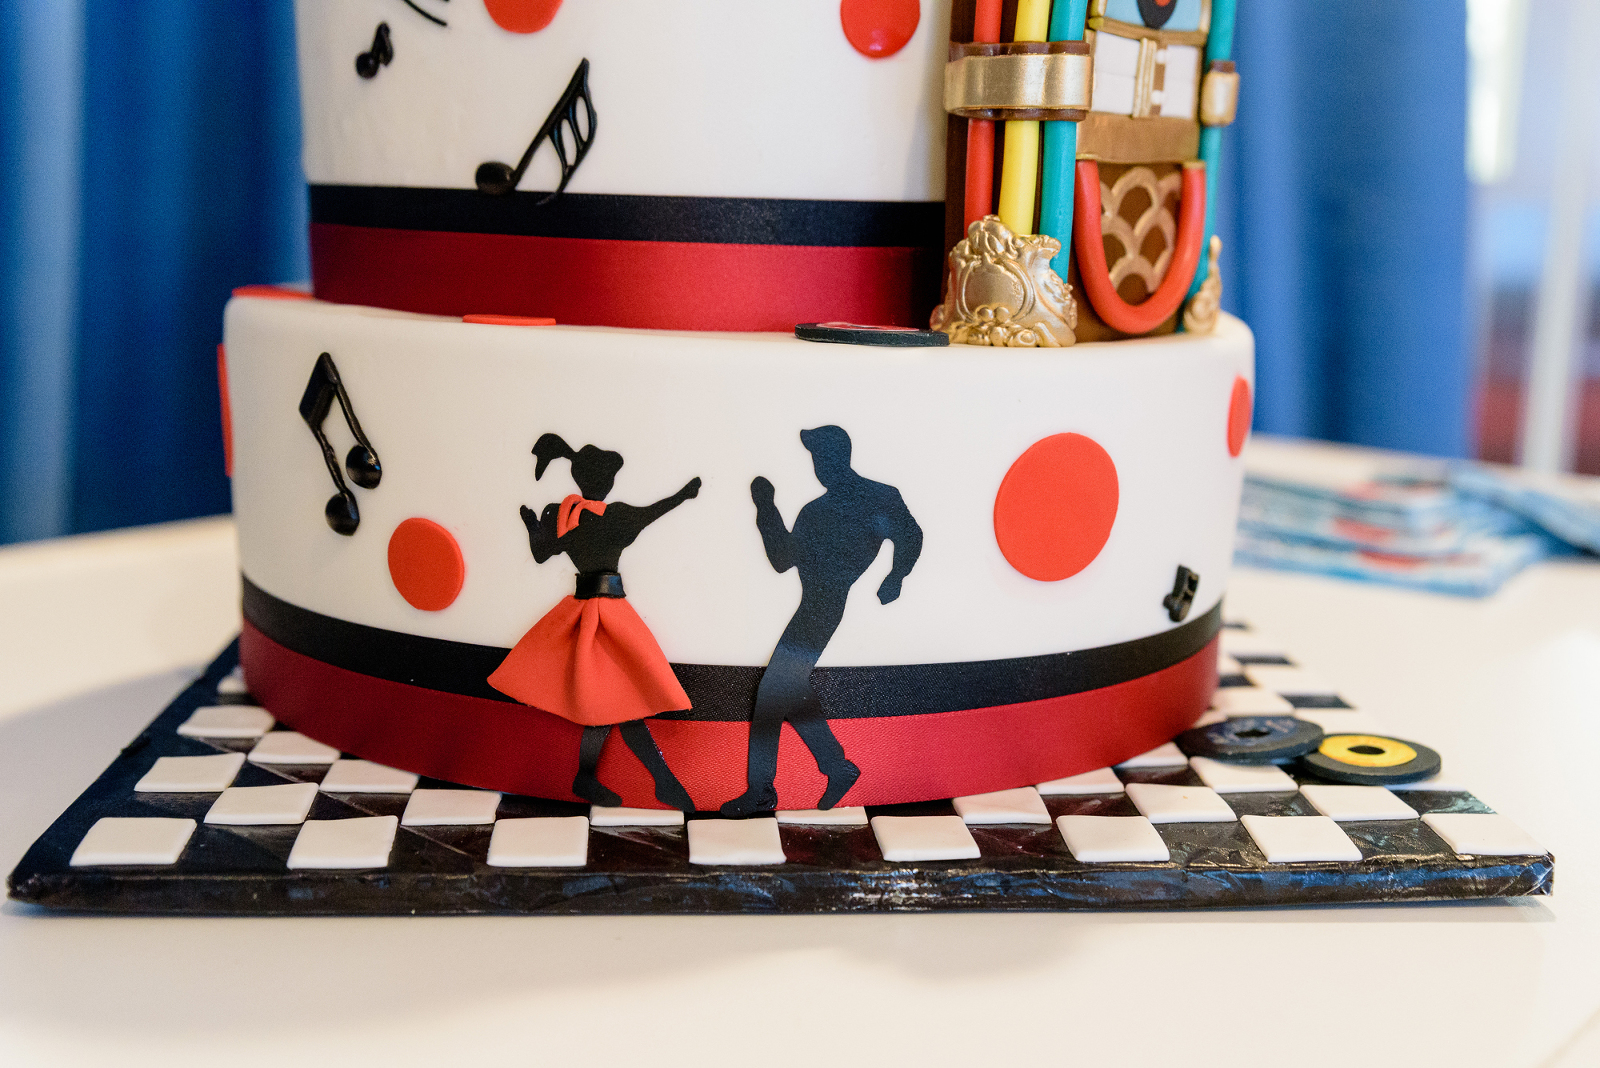 75th Surprise Birthday Party with a 1950s Diner theme at Diamond Lake Yacht Club in Edwardsburg, MI. Photographed by Katie Whitcomb Photography, Event Planning by Celebrated Events